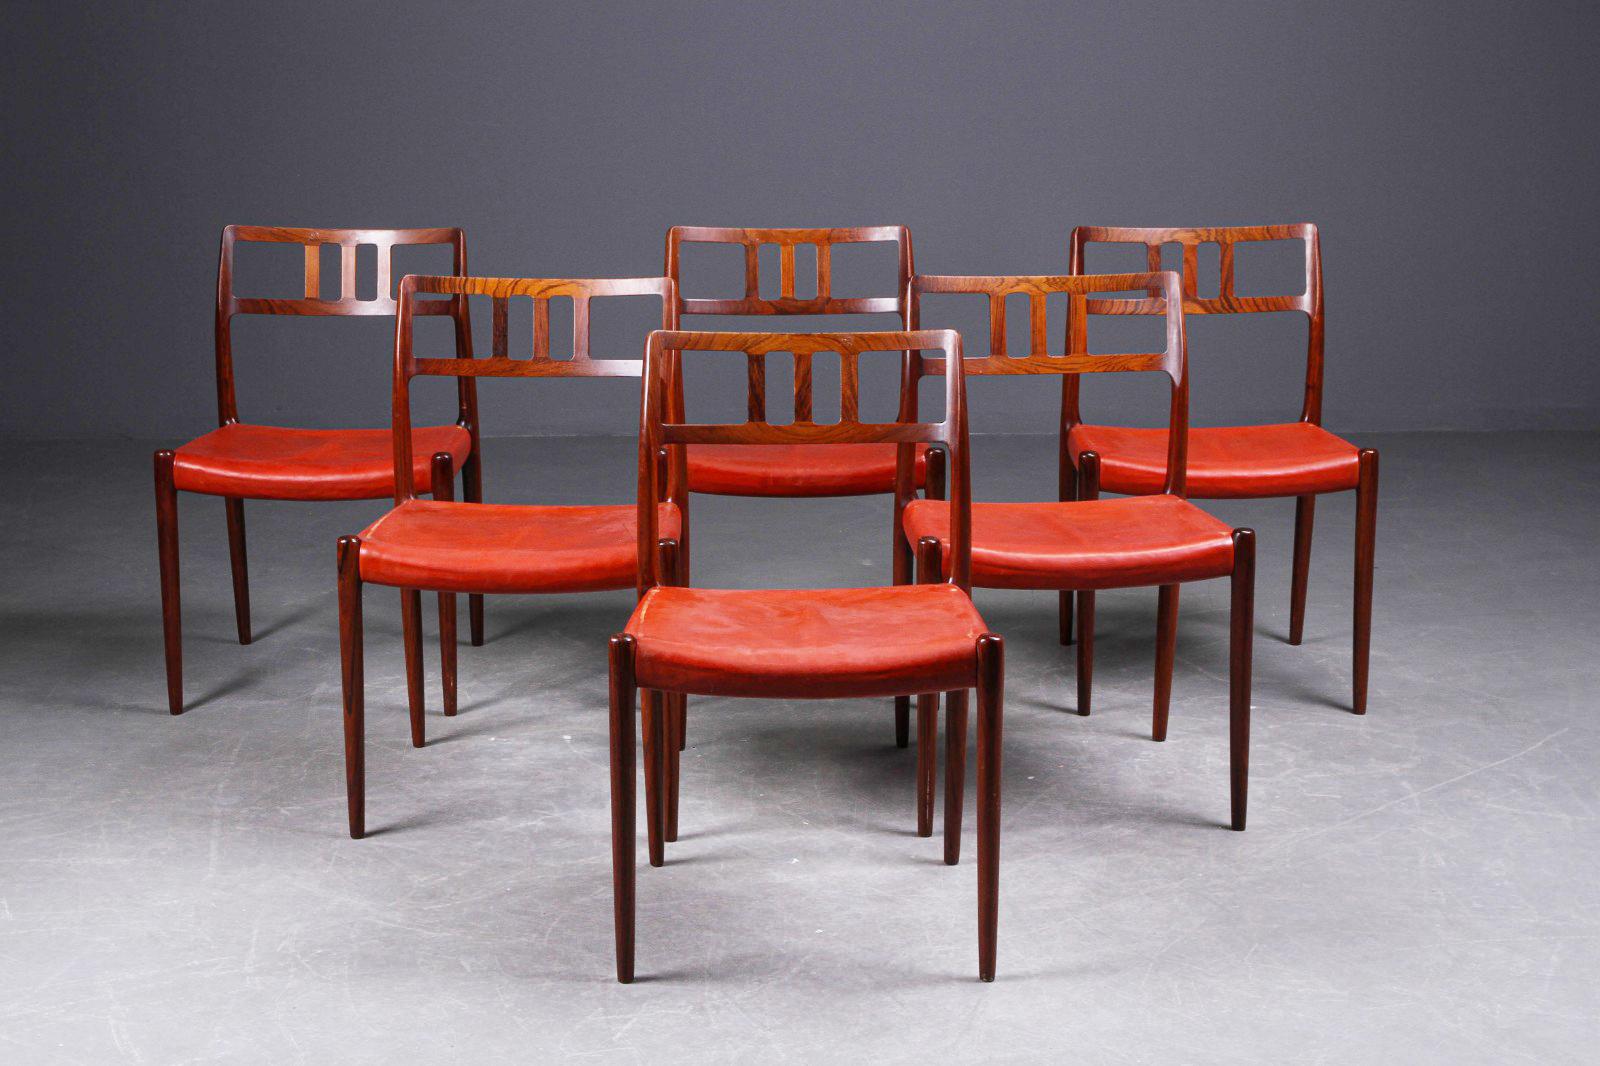 Extremal rare set of 6 dining chairs model 79 designed 1966 by Niels O. Møller and produced by J.L Møllers møbelfabrik in Denmark.
Hardwood frame with a leather upholstery, this can be change free of charge to another leather color or fabric, the